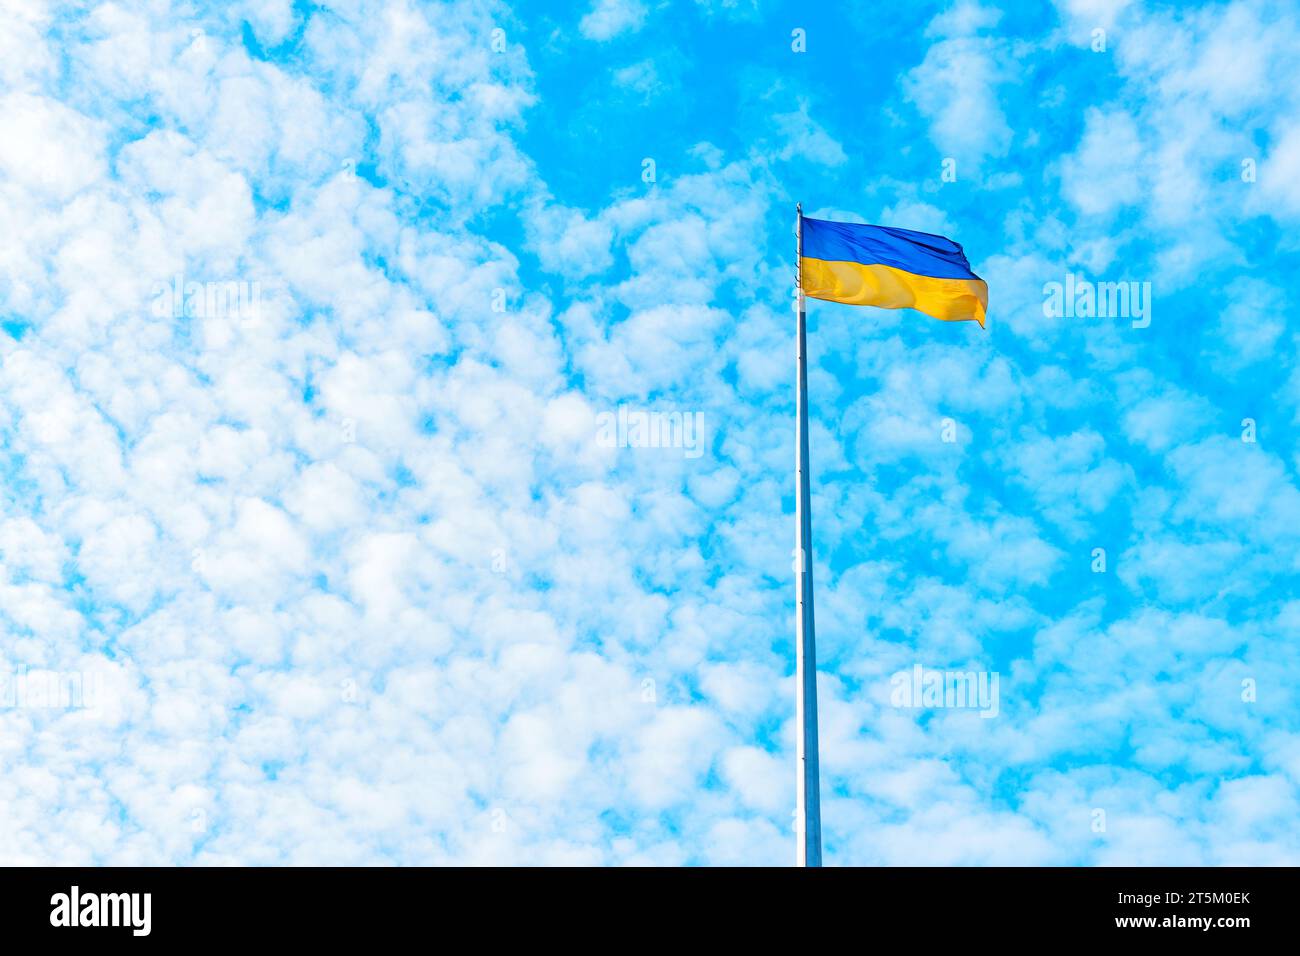 Ukrainian flag proudly waving on its pole against the backdrop of towering cumulus clouds in the deep blue sky. Stock Photo